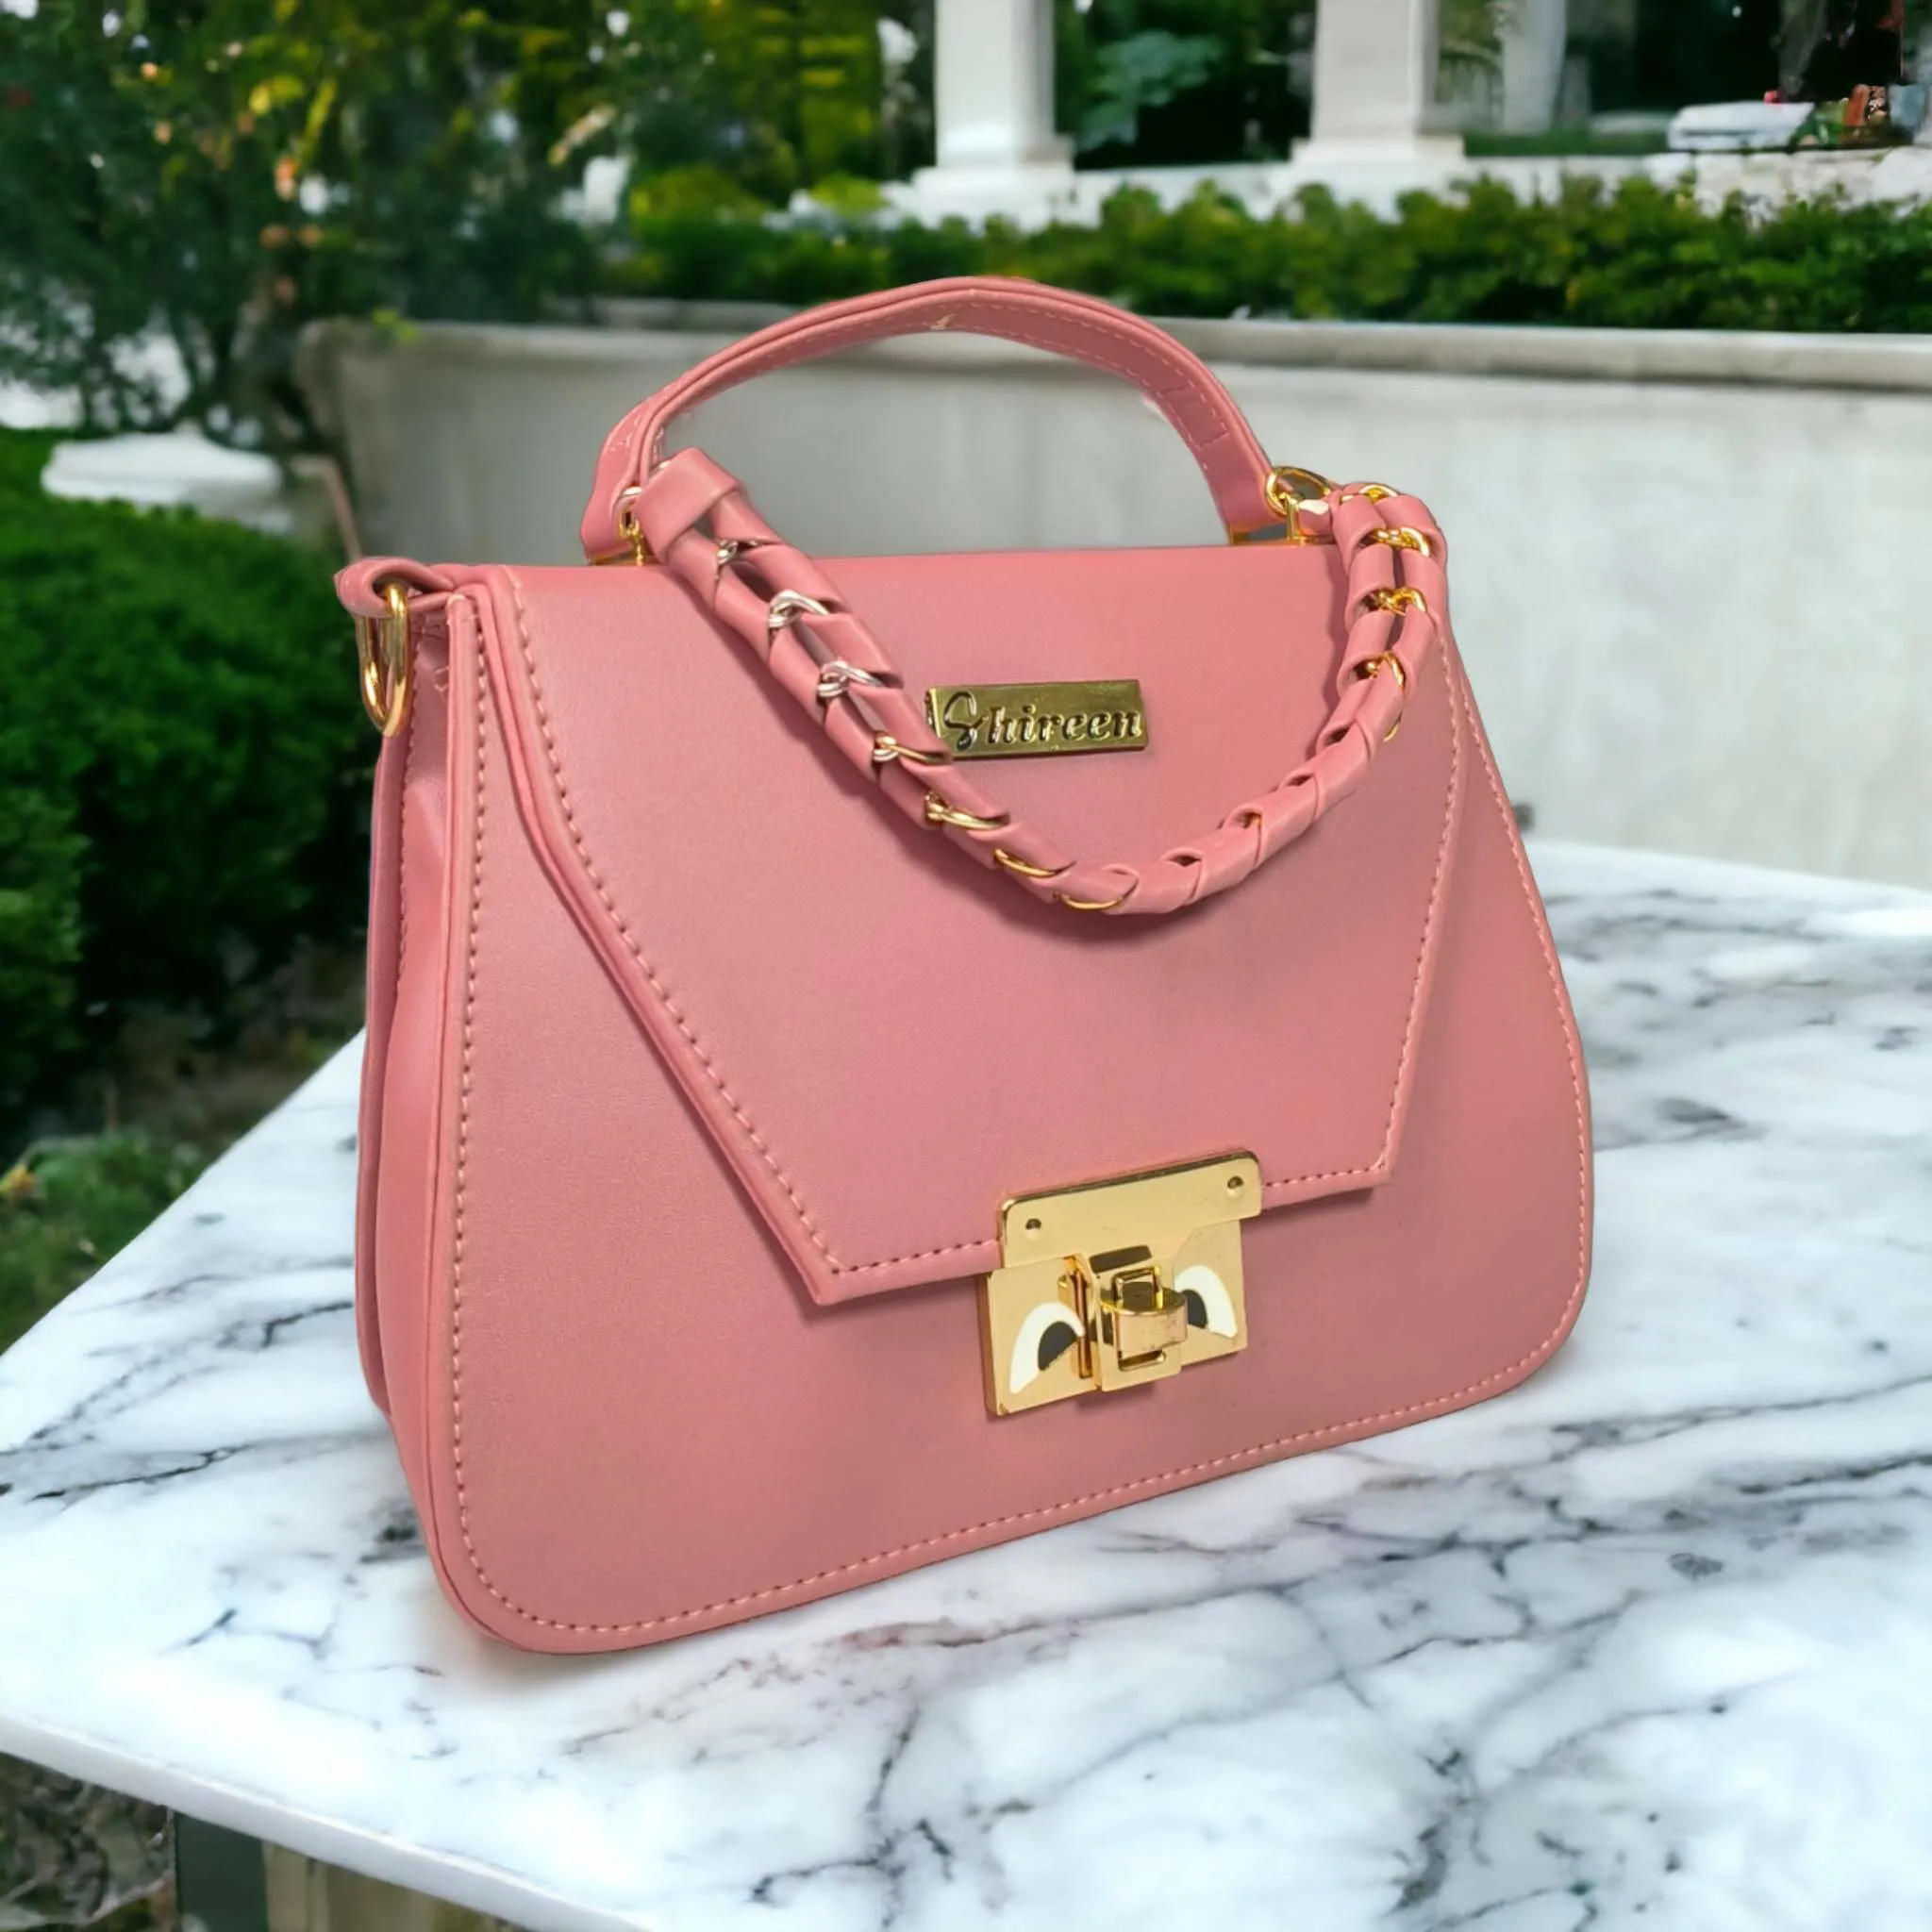 Adpel Ladies Purse for sale from Perkal Promo